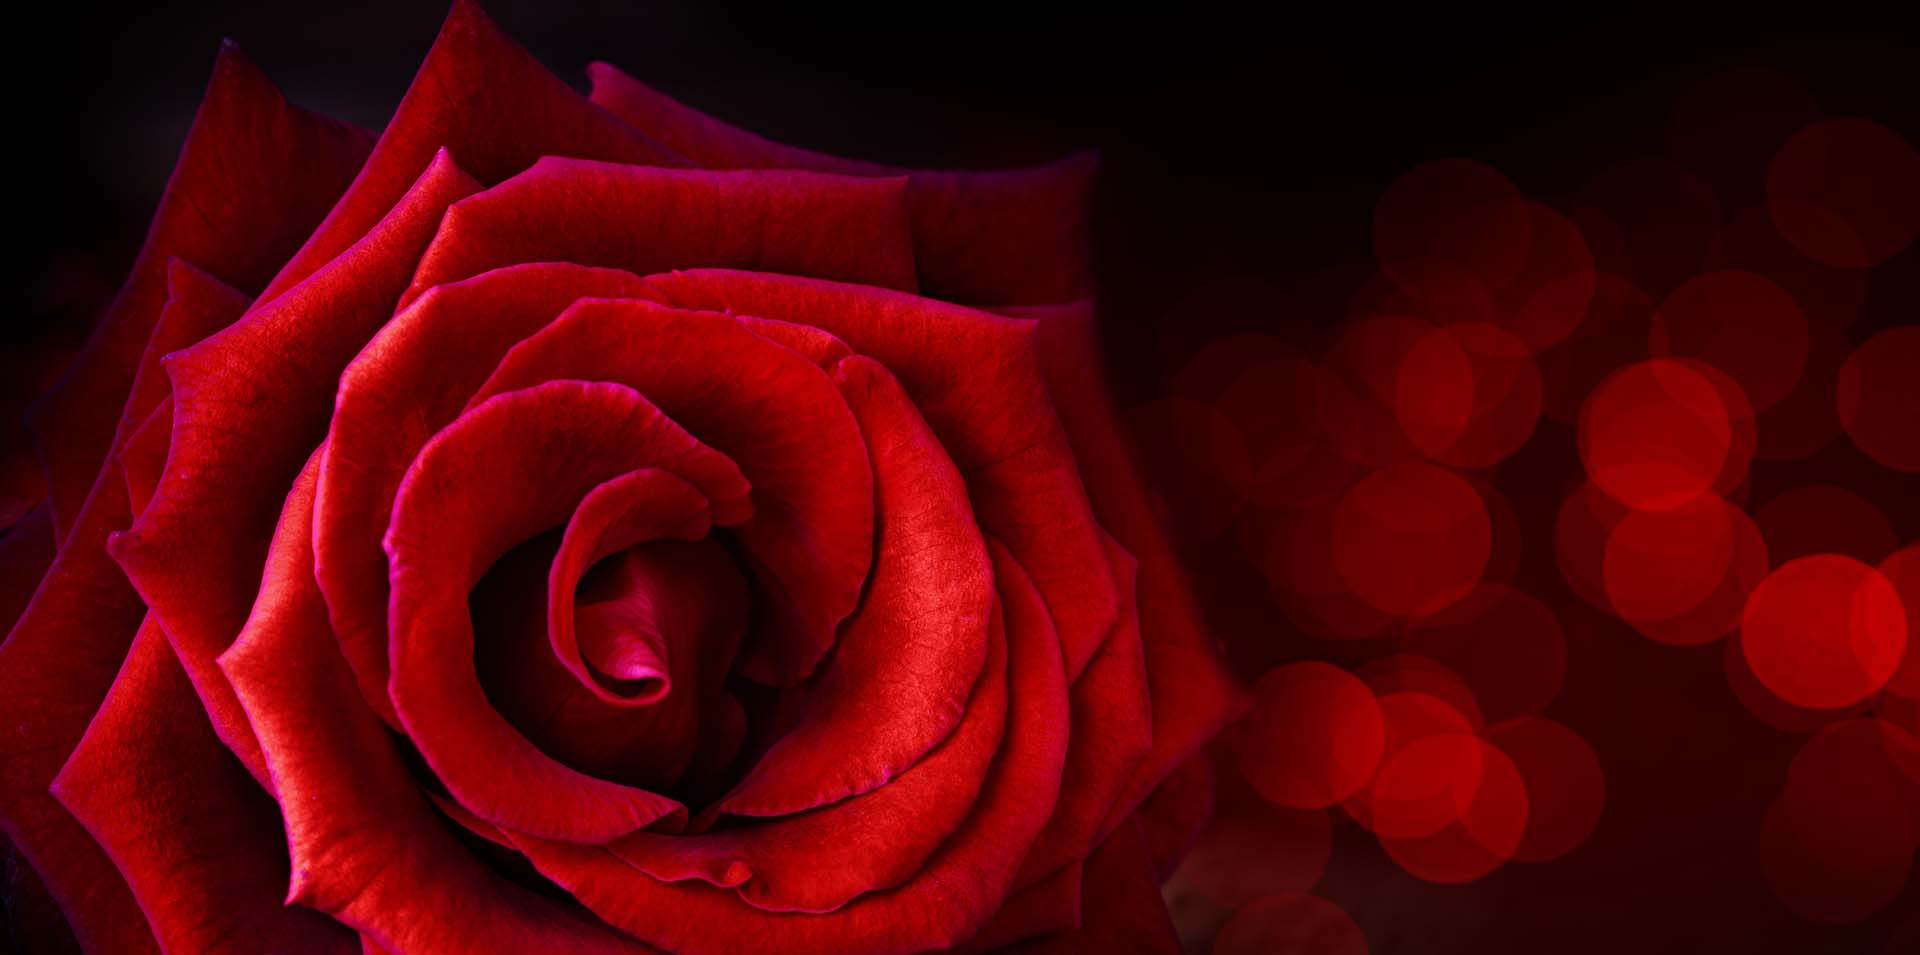 A close up of a red rose: Telephone number 1-877-872-9909